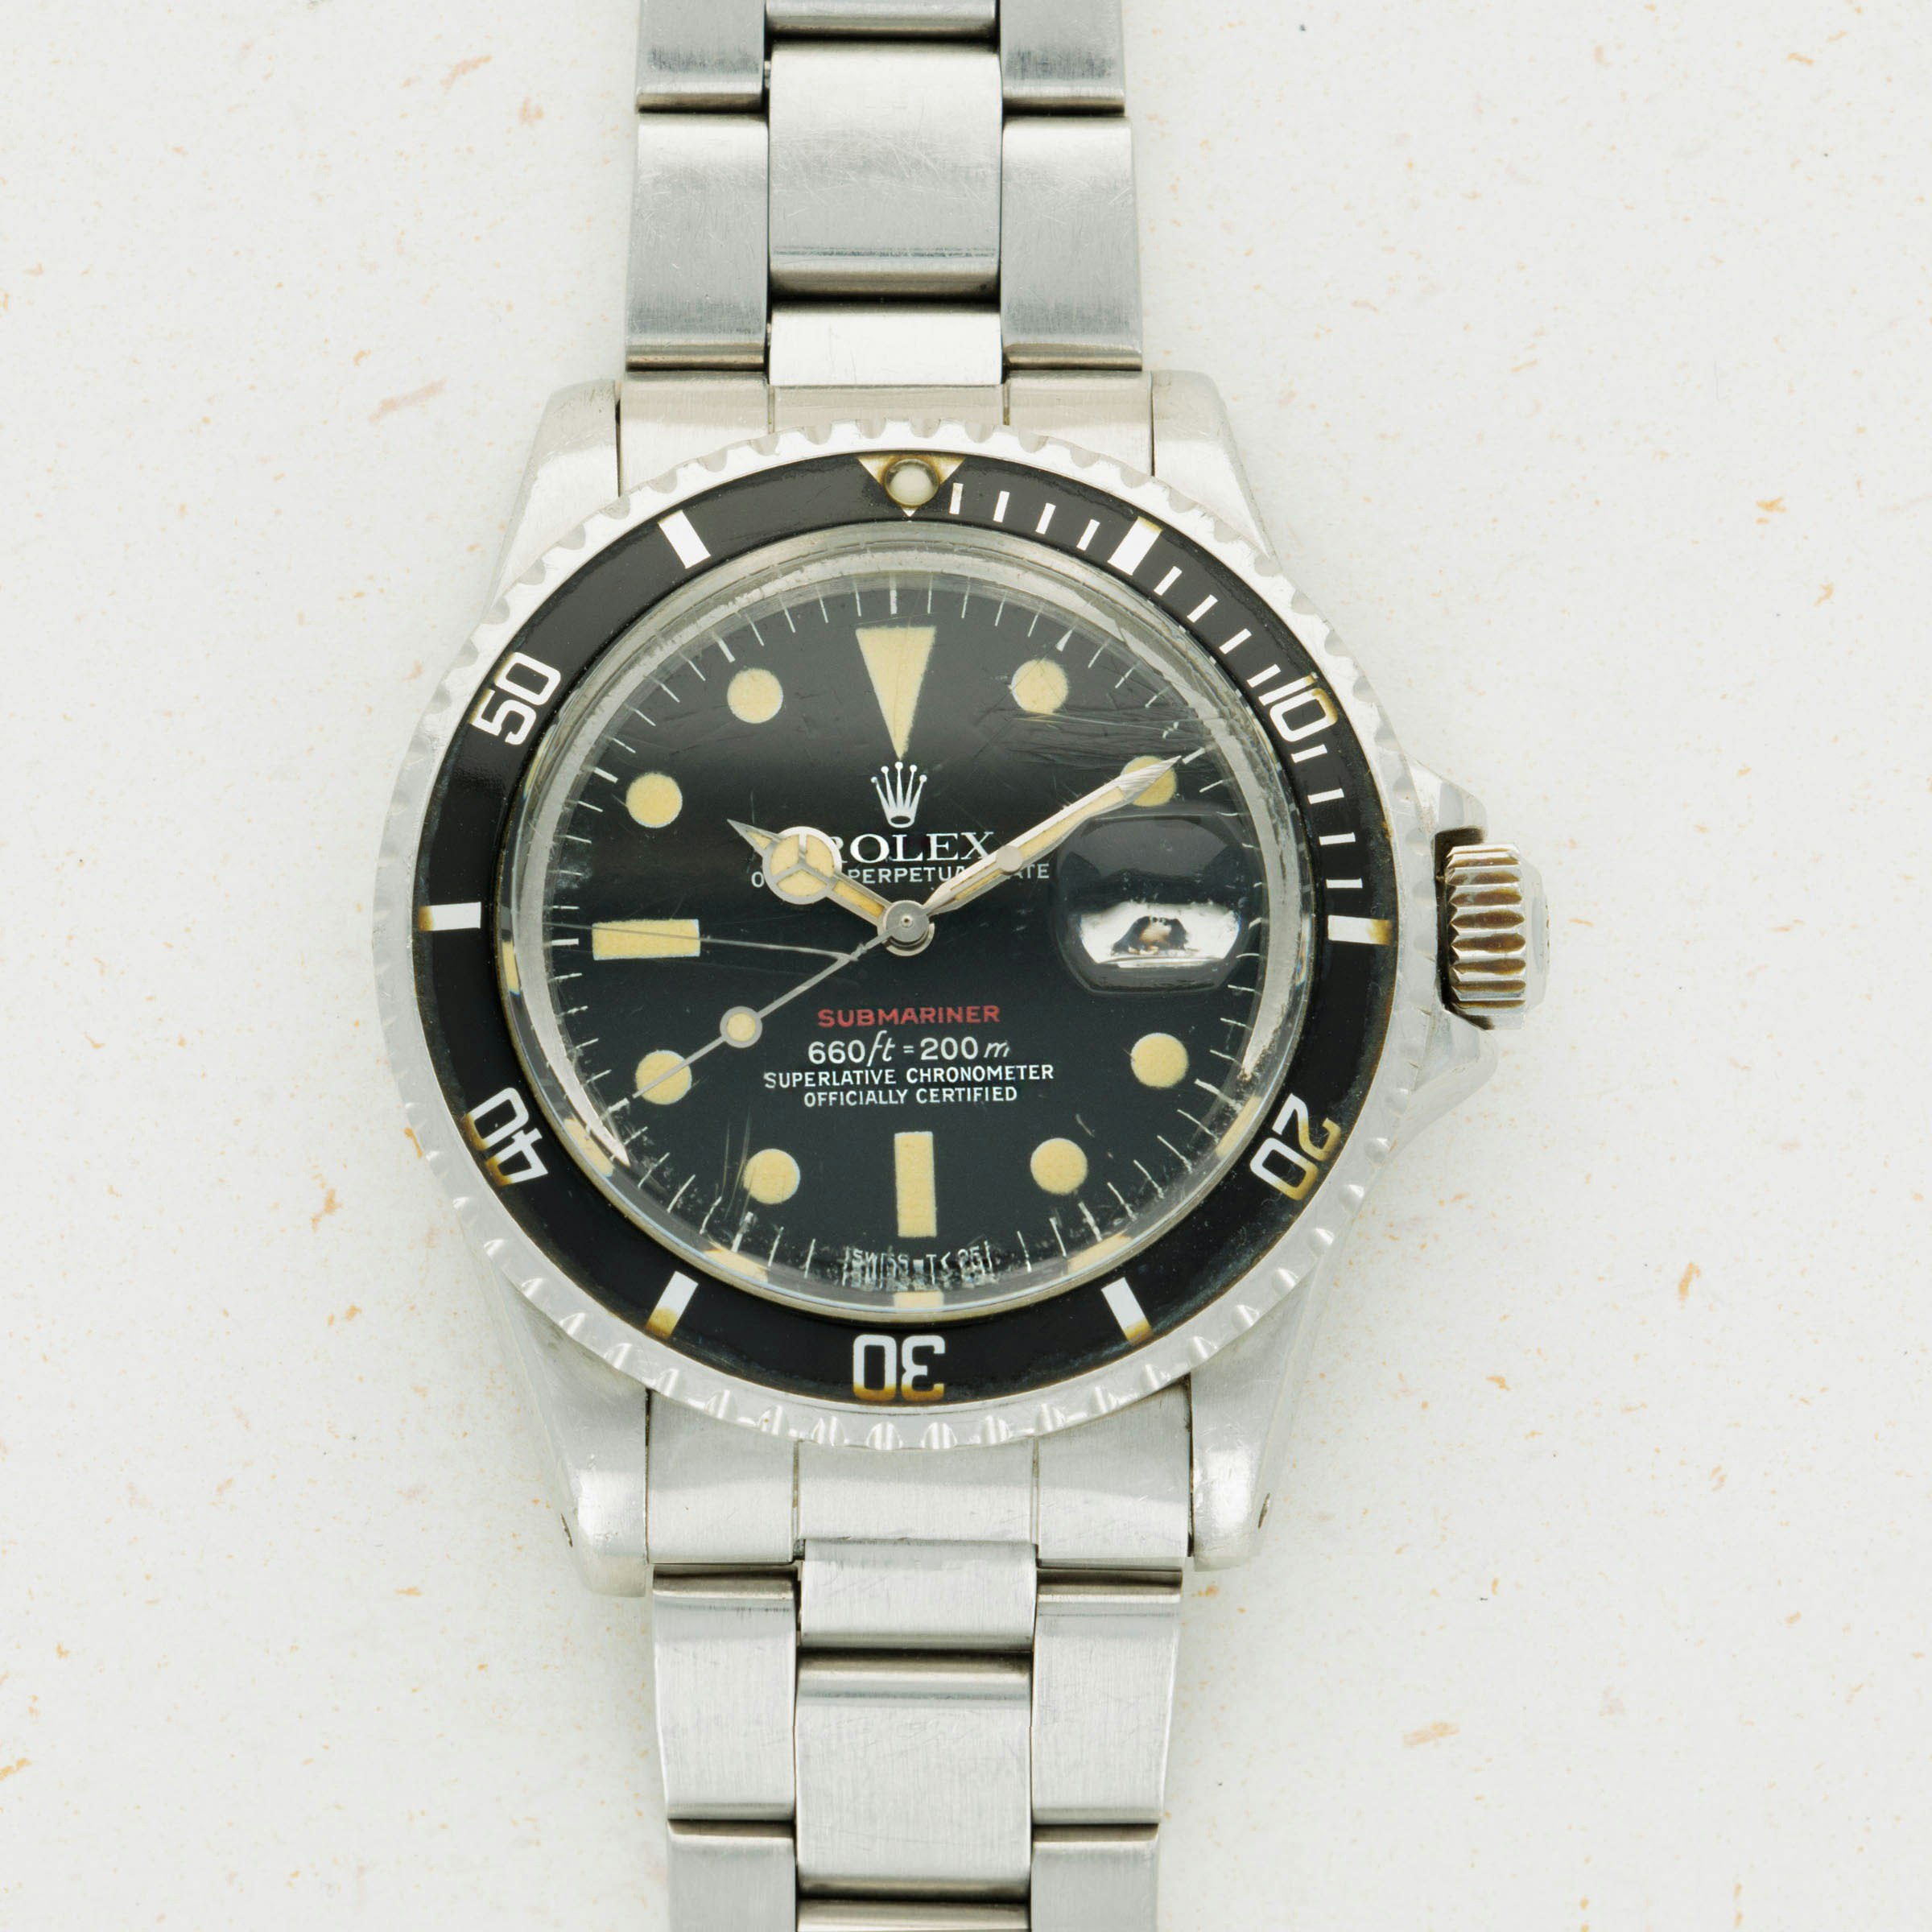 Thumbnail for Rolex Red Submariner 1680 MK VI Dial